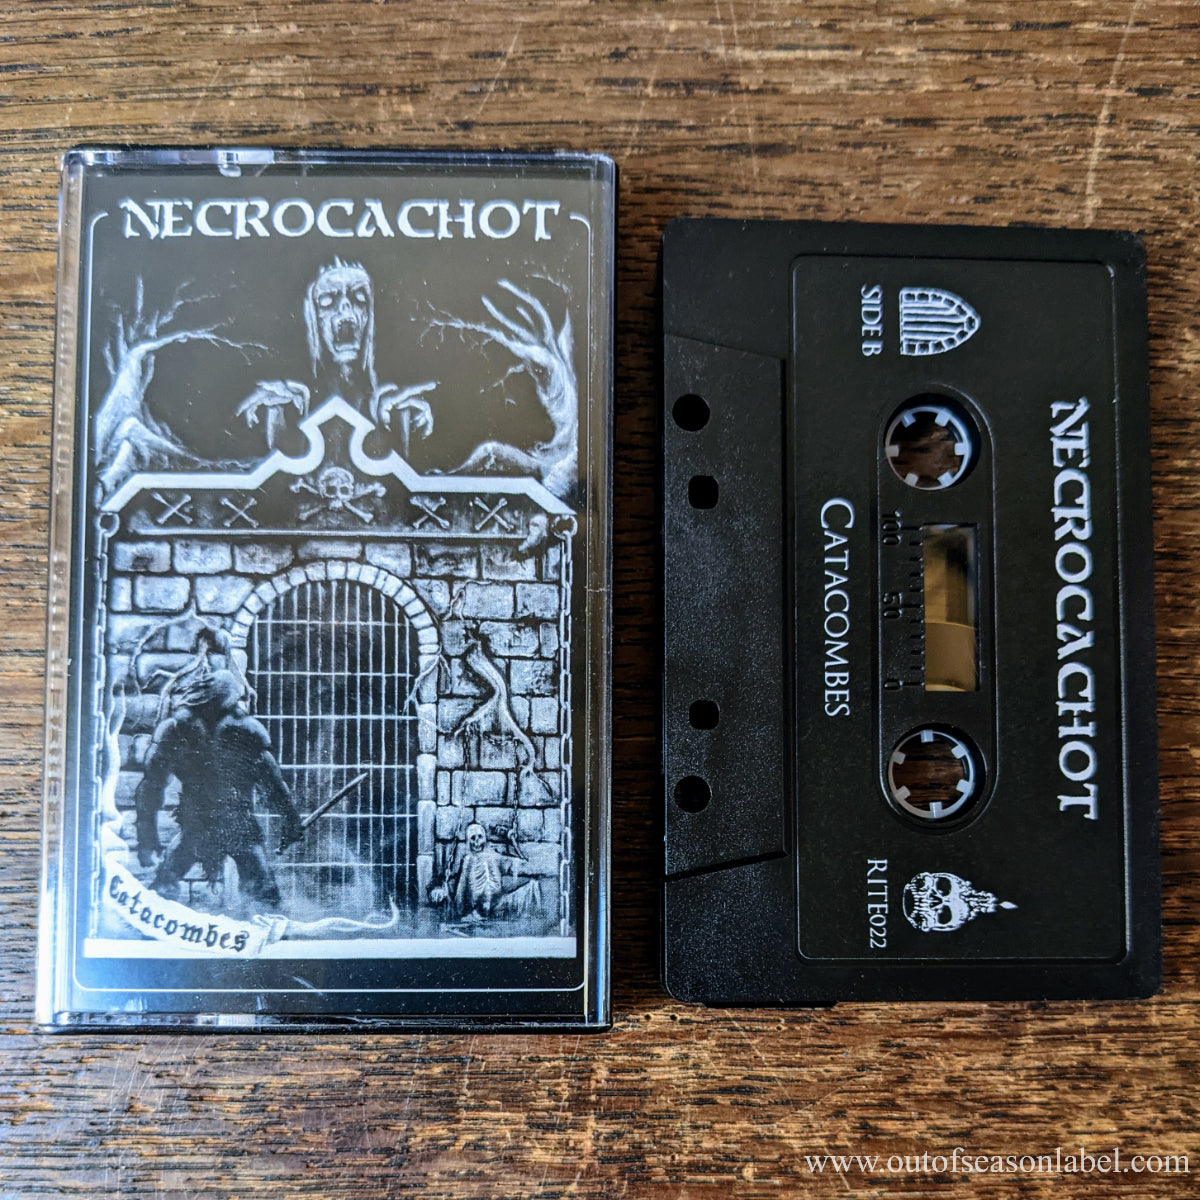 [SOLD OUT] NECROCACHOT "Catacombes" Cassette Tape (Lim. 75)